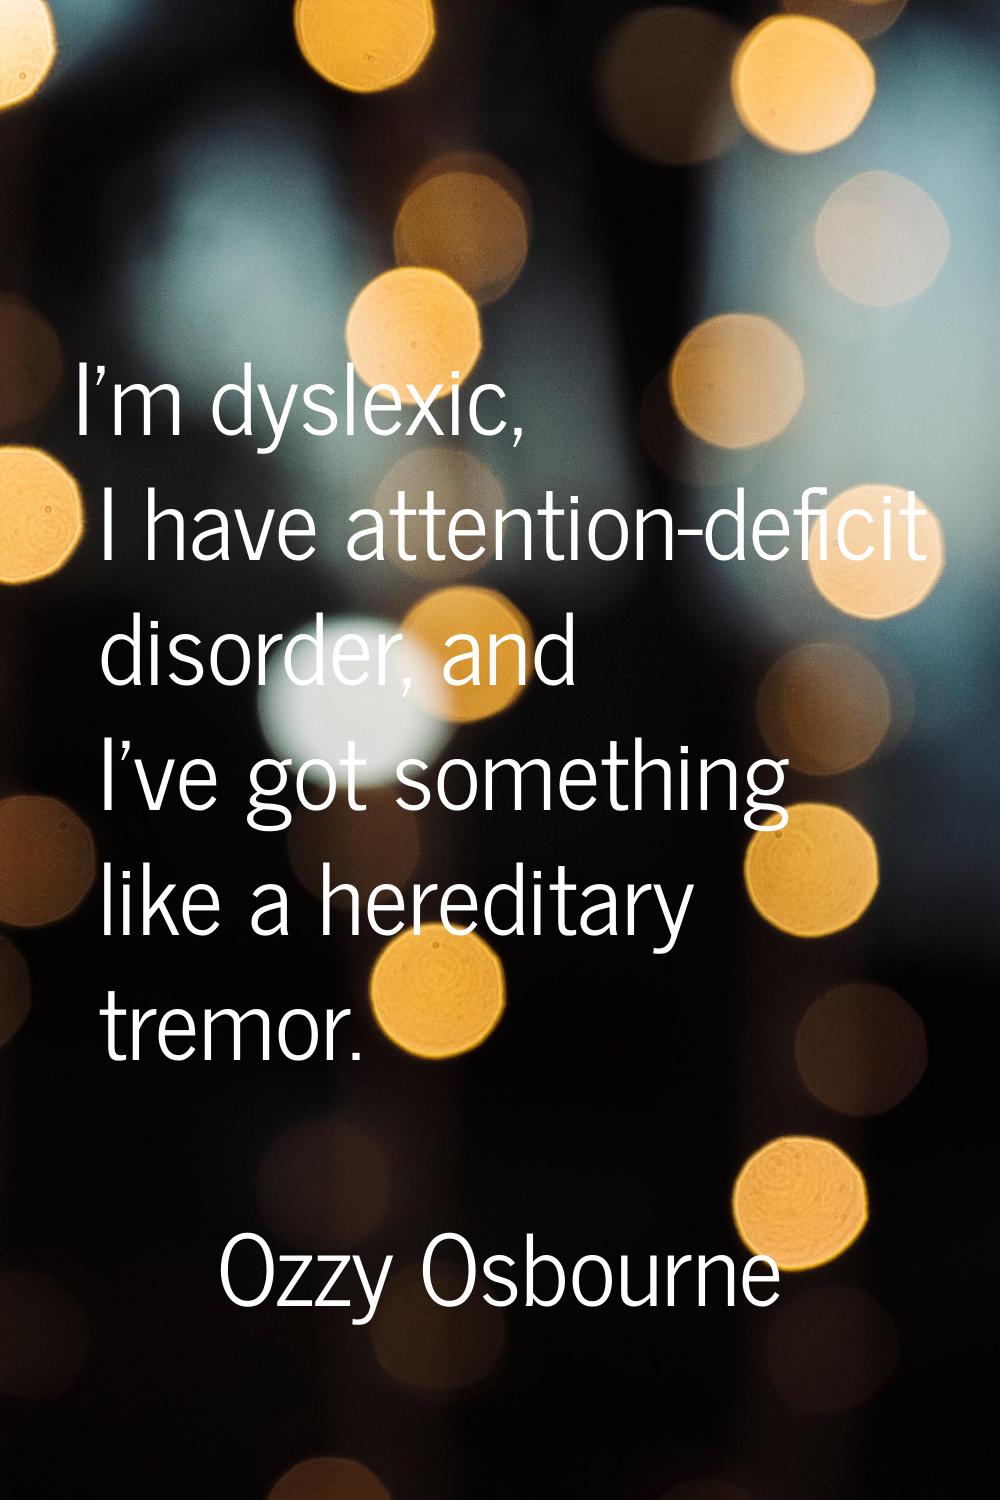 I'm dyslexic, I have attention-deficit disorder, and I've got something like a hereditary tremor.